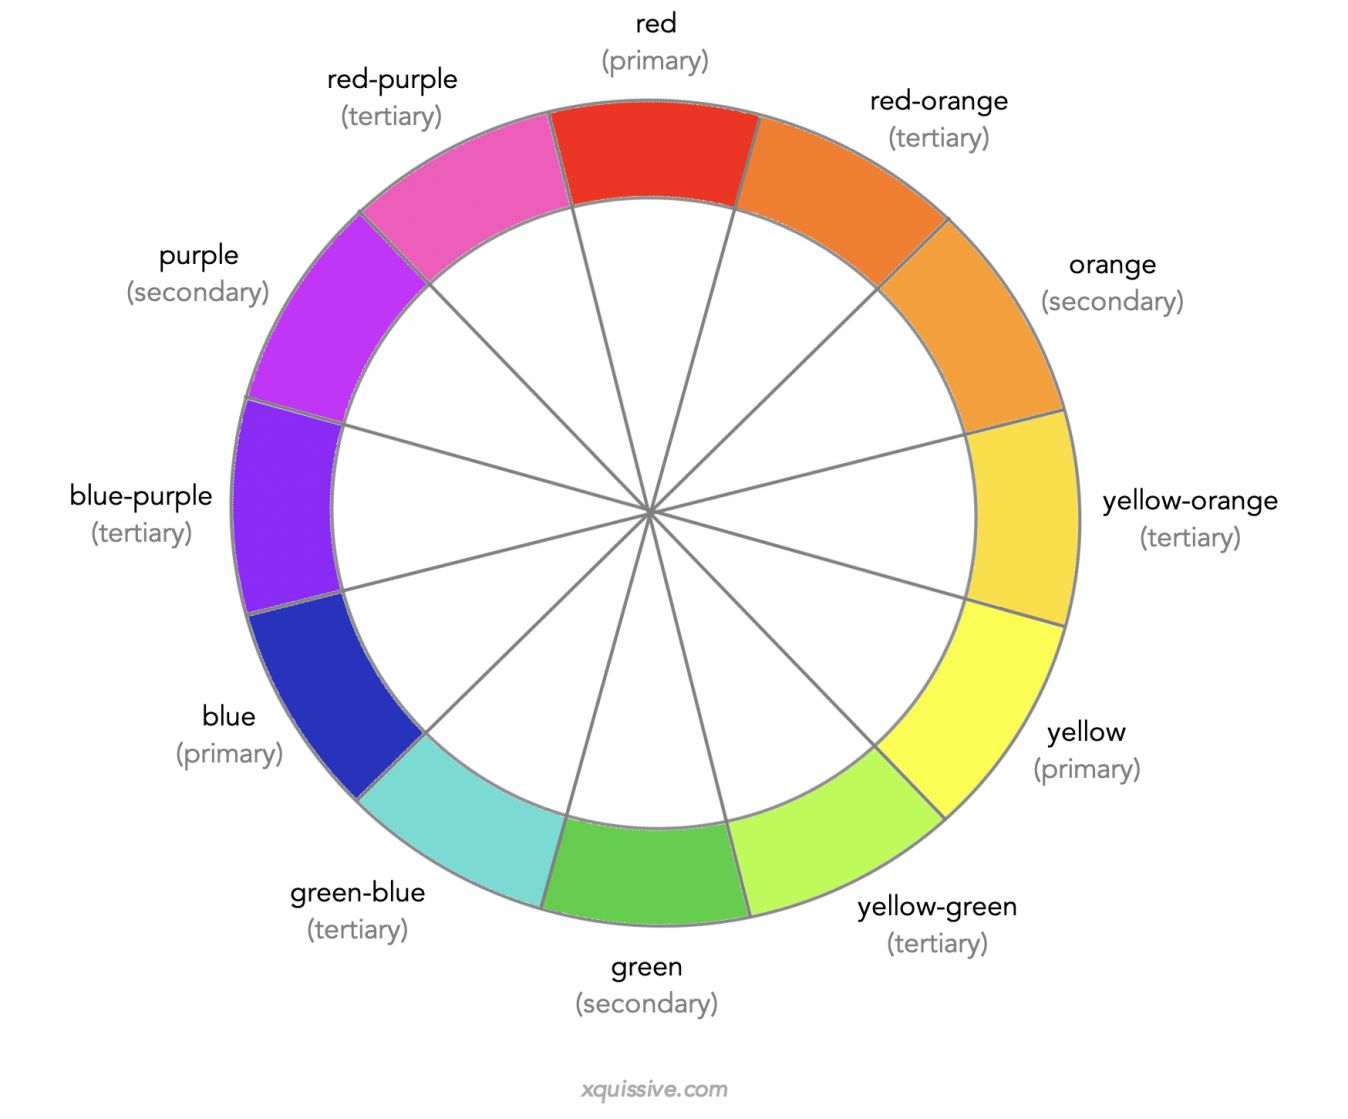 Basic colours - colour theory in design